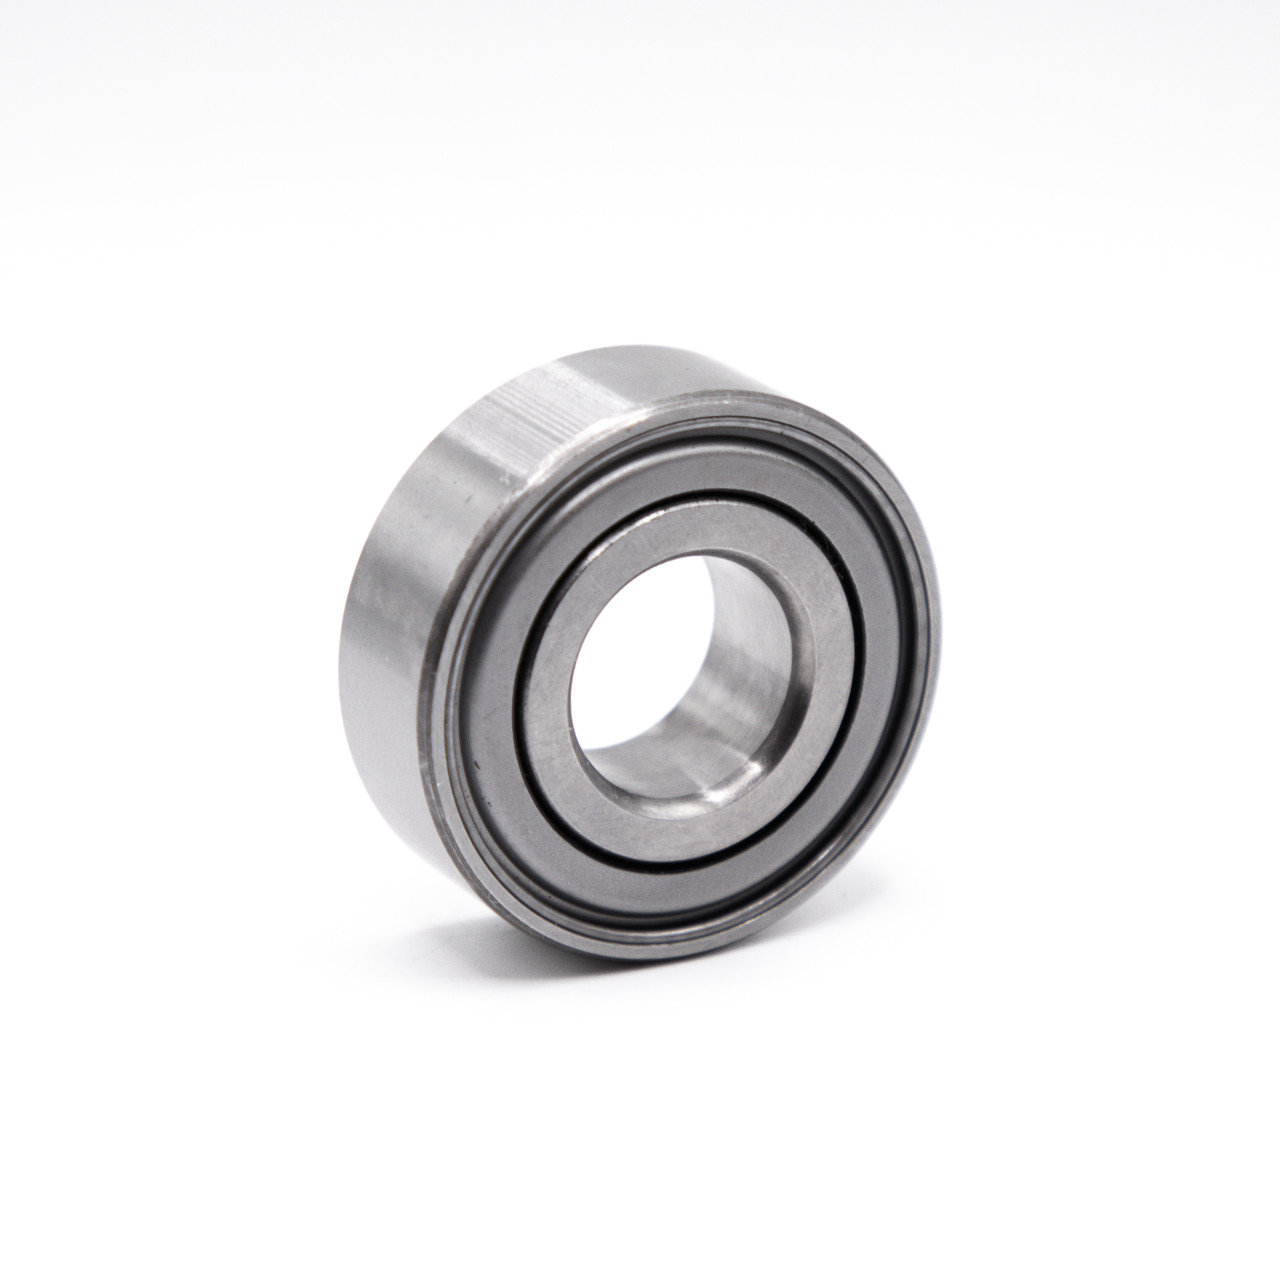 SS6203-ZZ Stainless Steel Ball Bearing 17x40x12 Side View